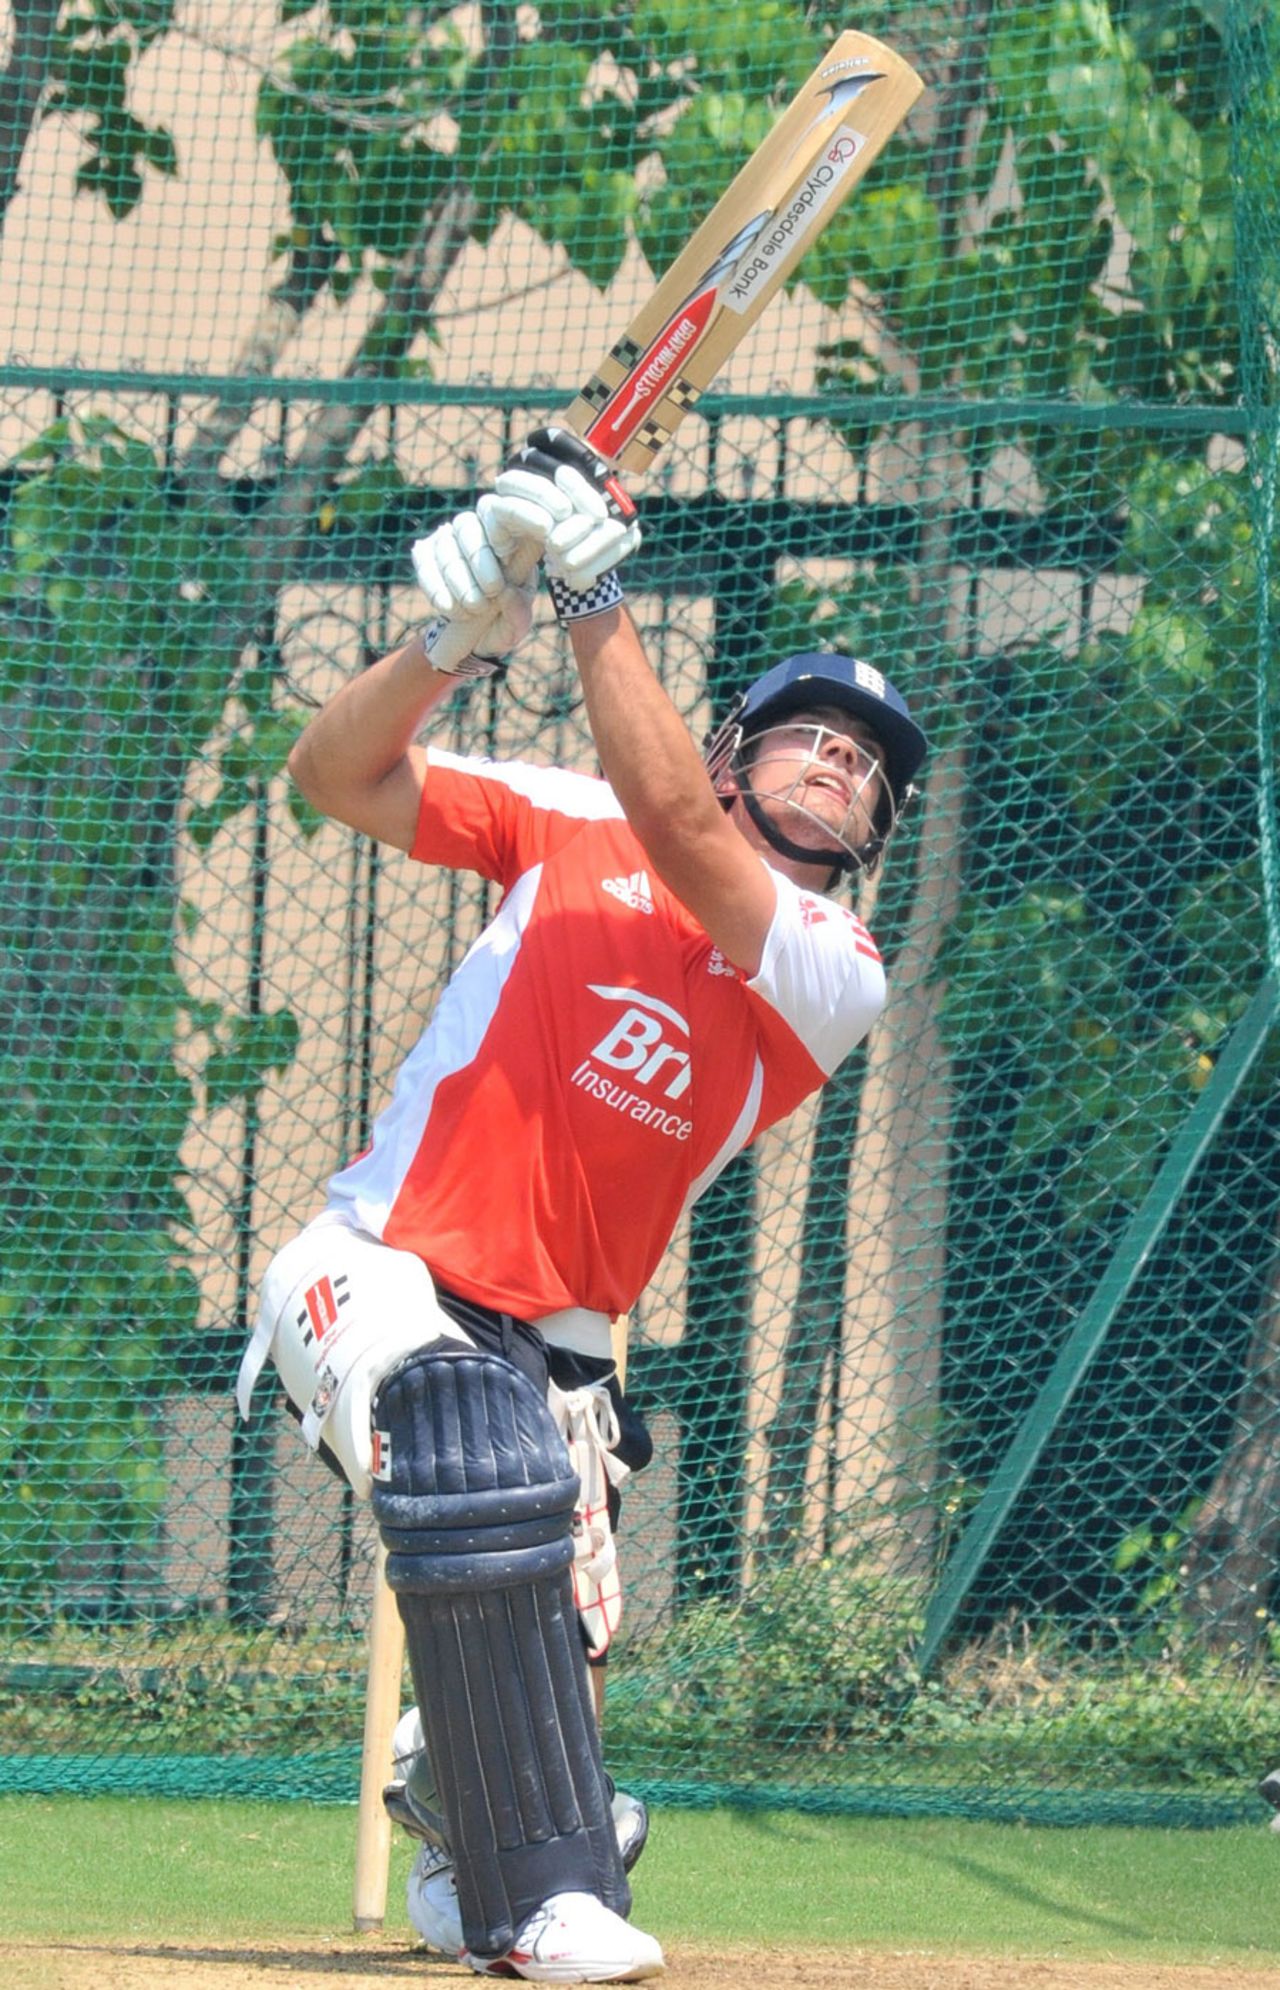 Alastair Cook plays a lofted shot during batting practice, Hyderabad, October 5, 2011